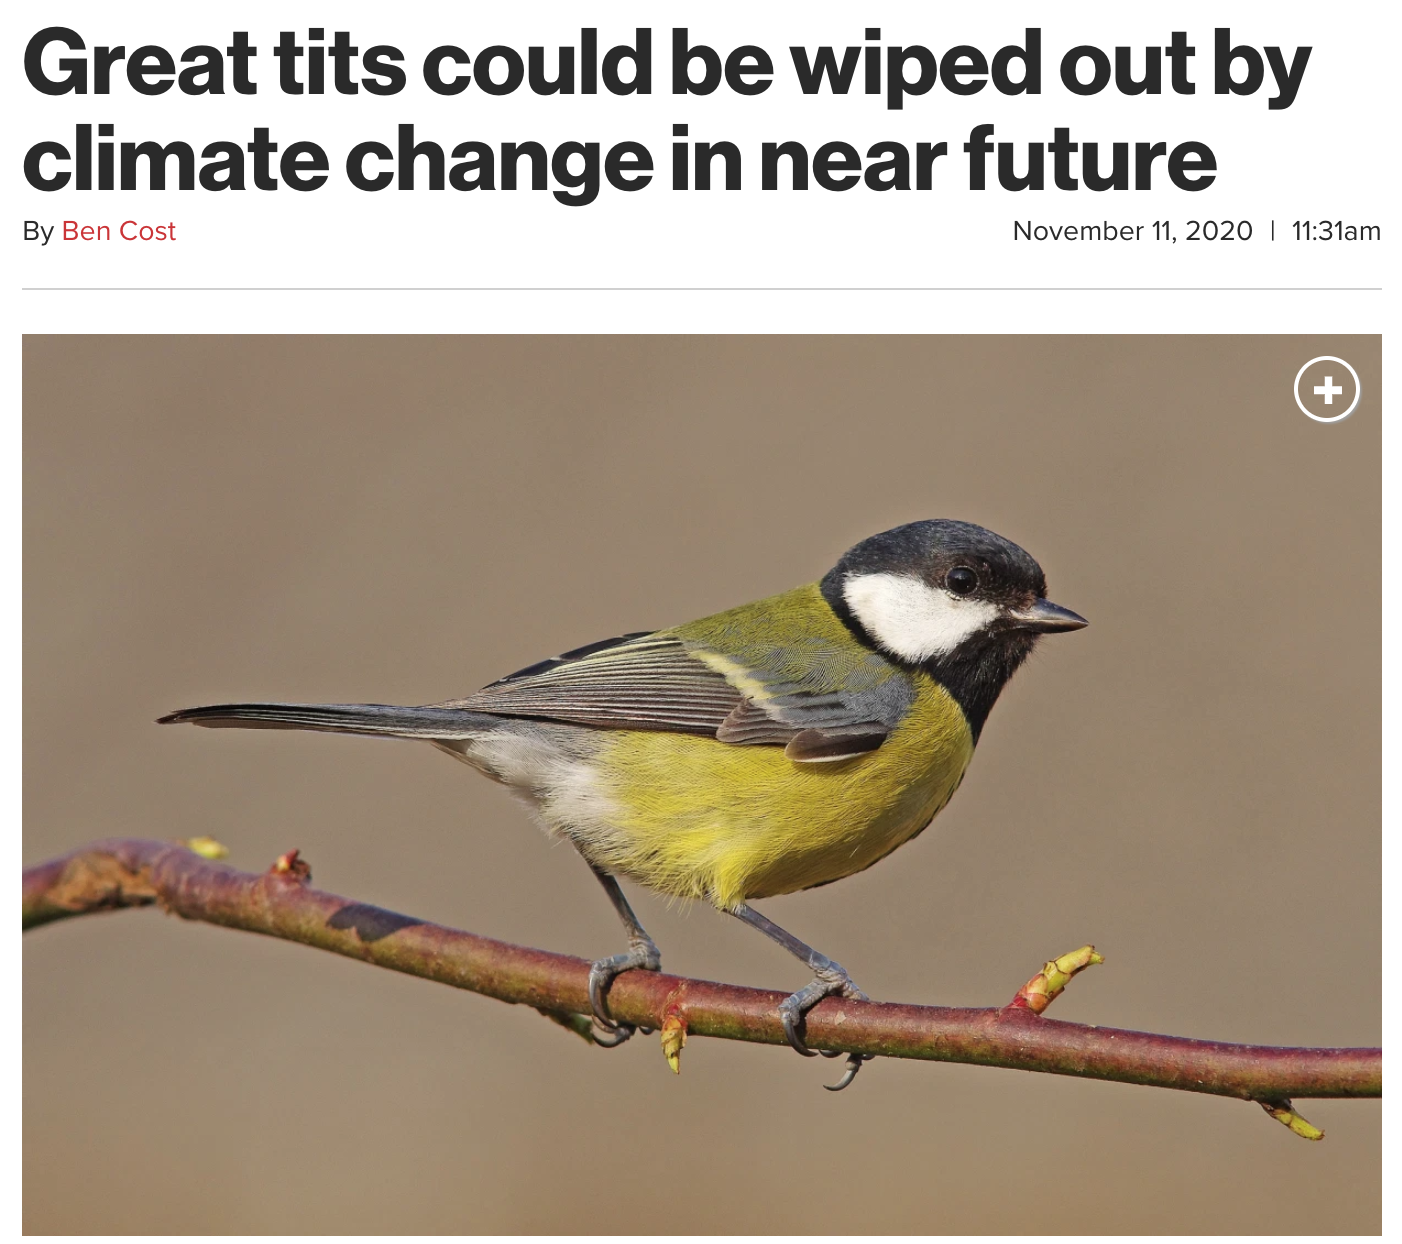 fauna - Great tits could be wiped out by climate change in near future By Ben Cost am